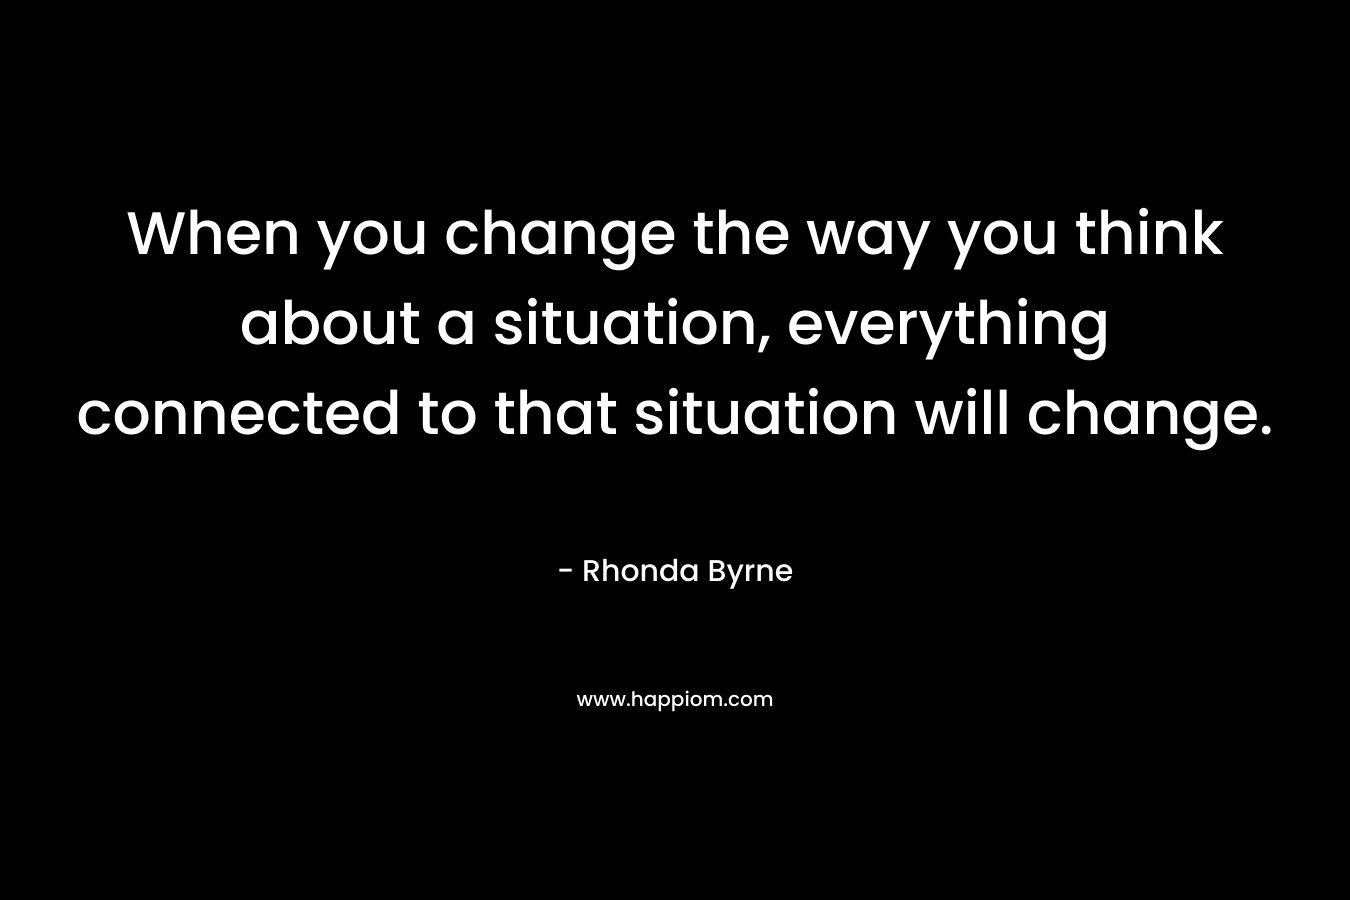 When you change the way you think about a situation, everything connected to that situation will change.